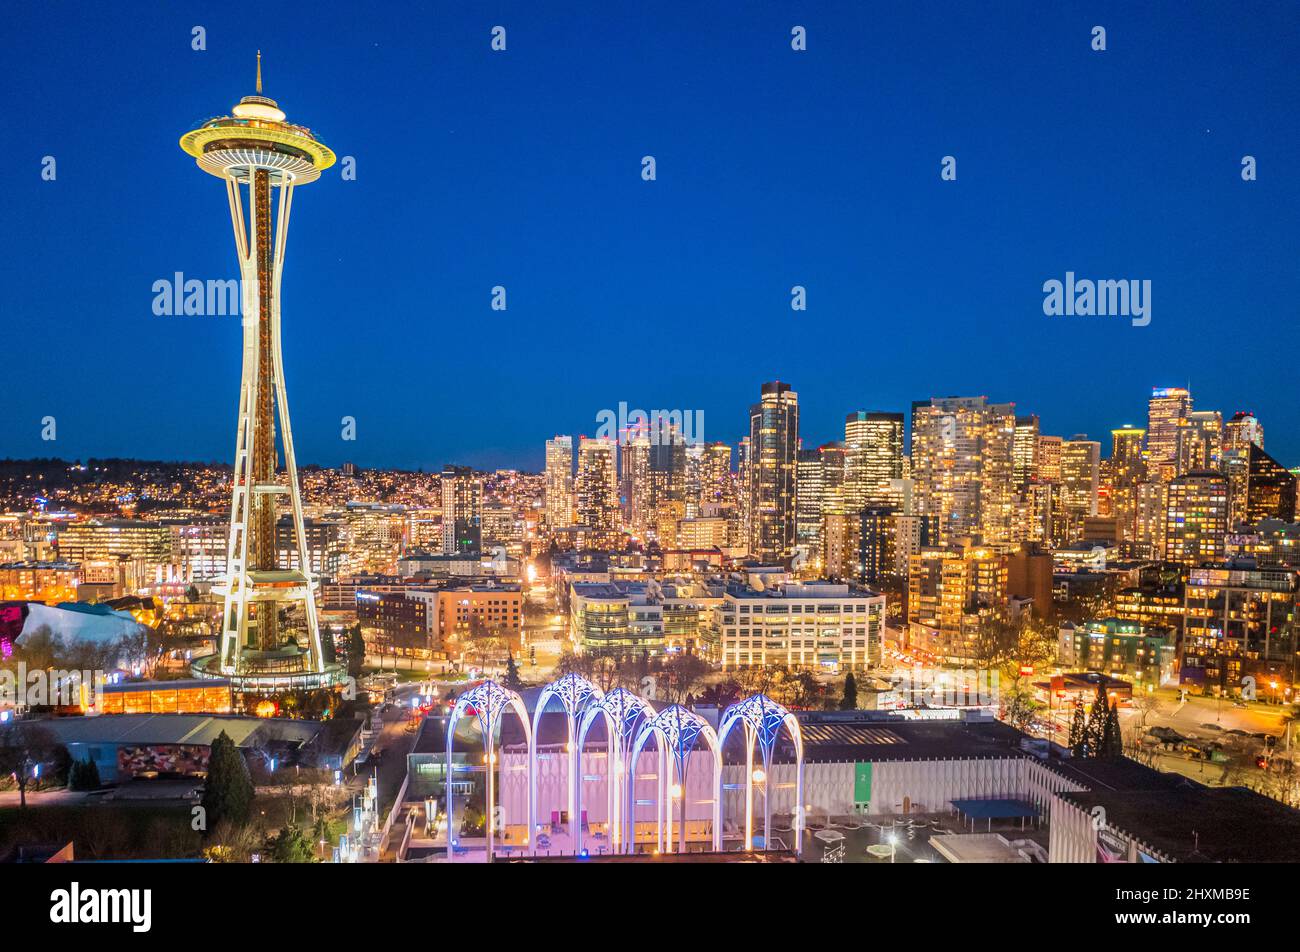 Seattle Center is an arts, educational, tourism and entertainment center in Seattle, Washington, United States. Stock Photo